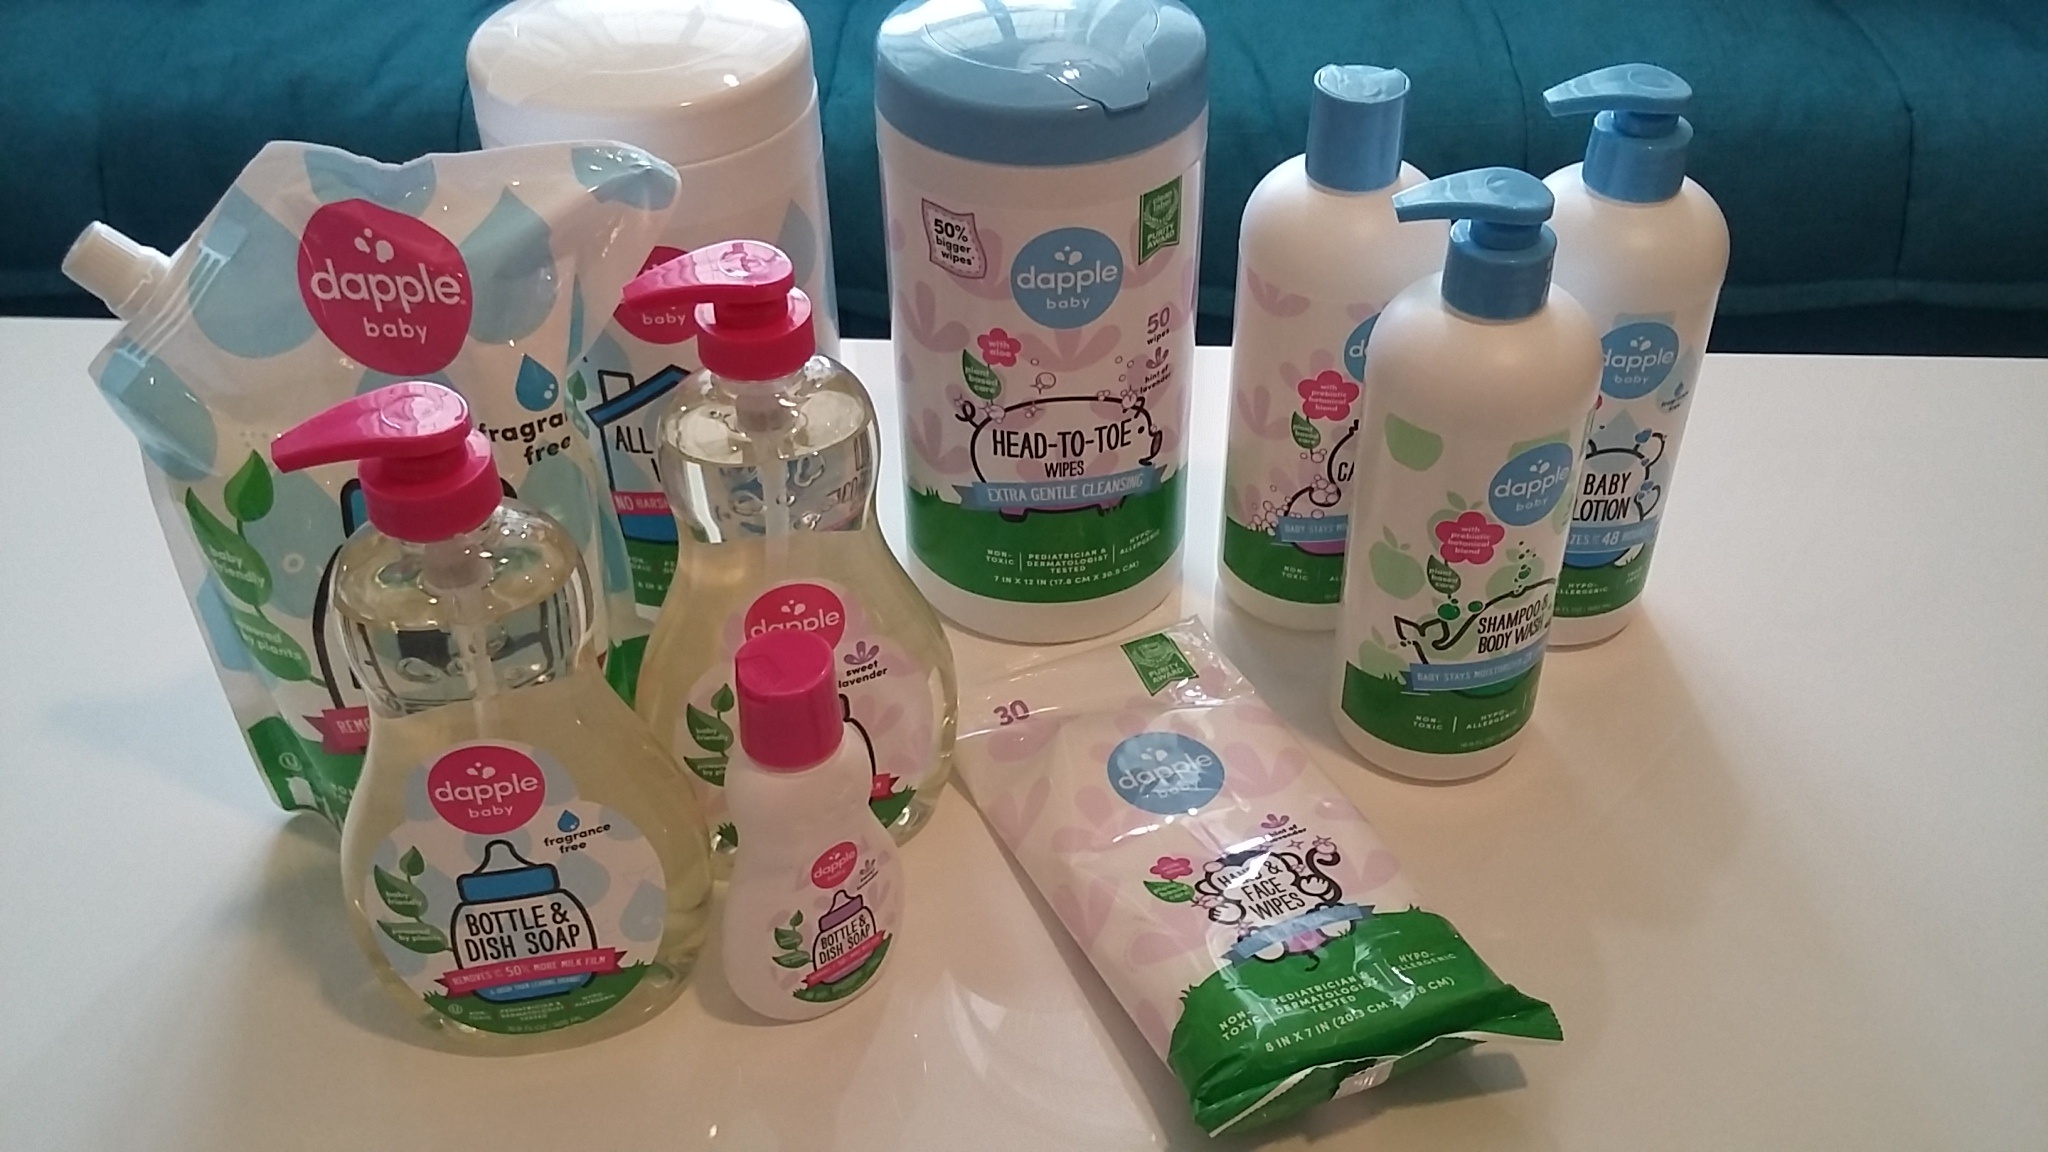 Dapple Baby Plant-Based Household and Personal Care 